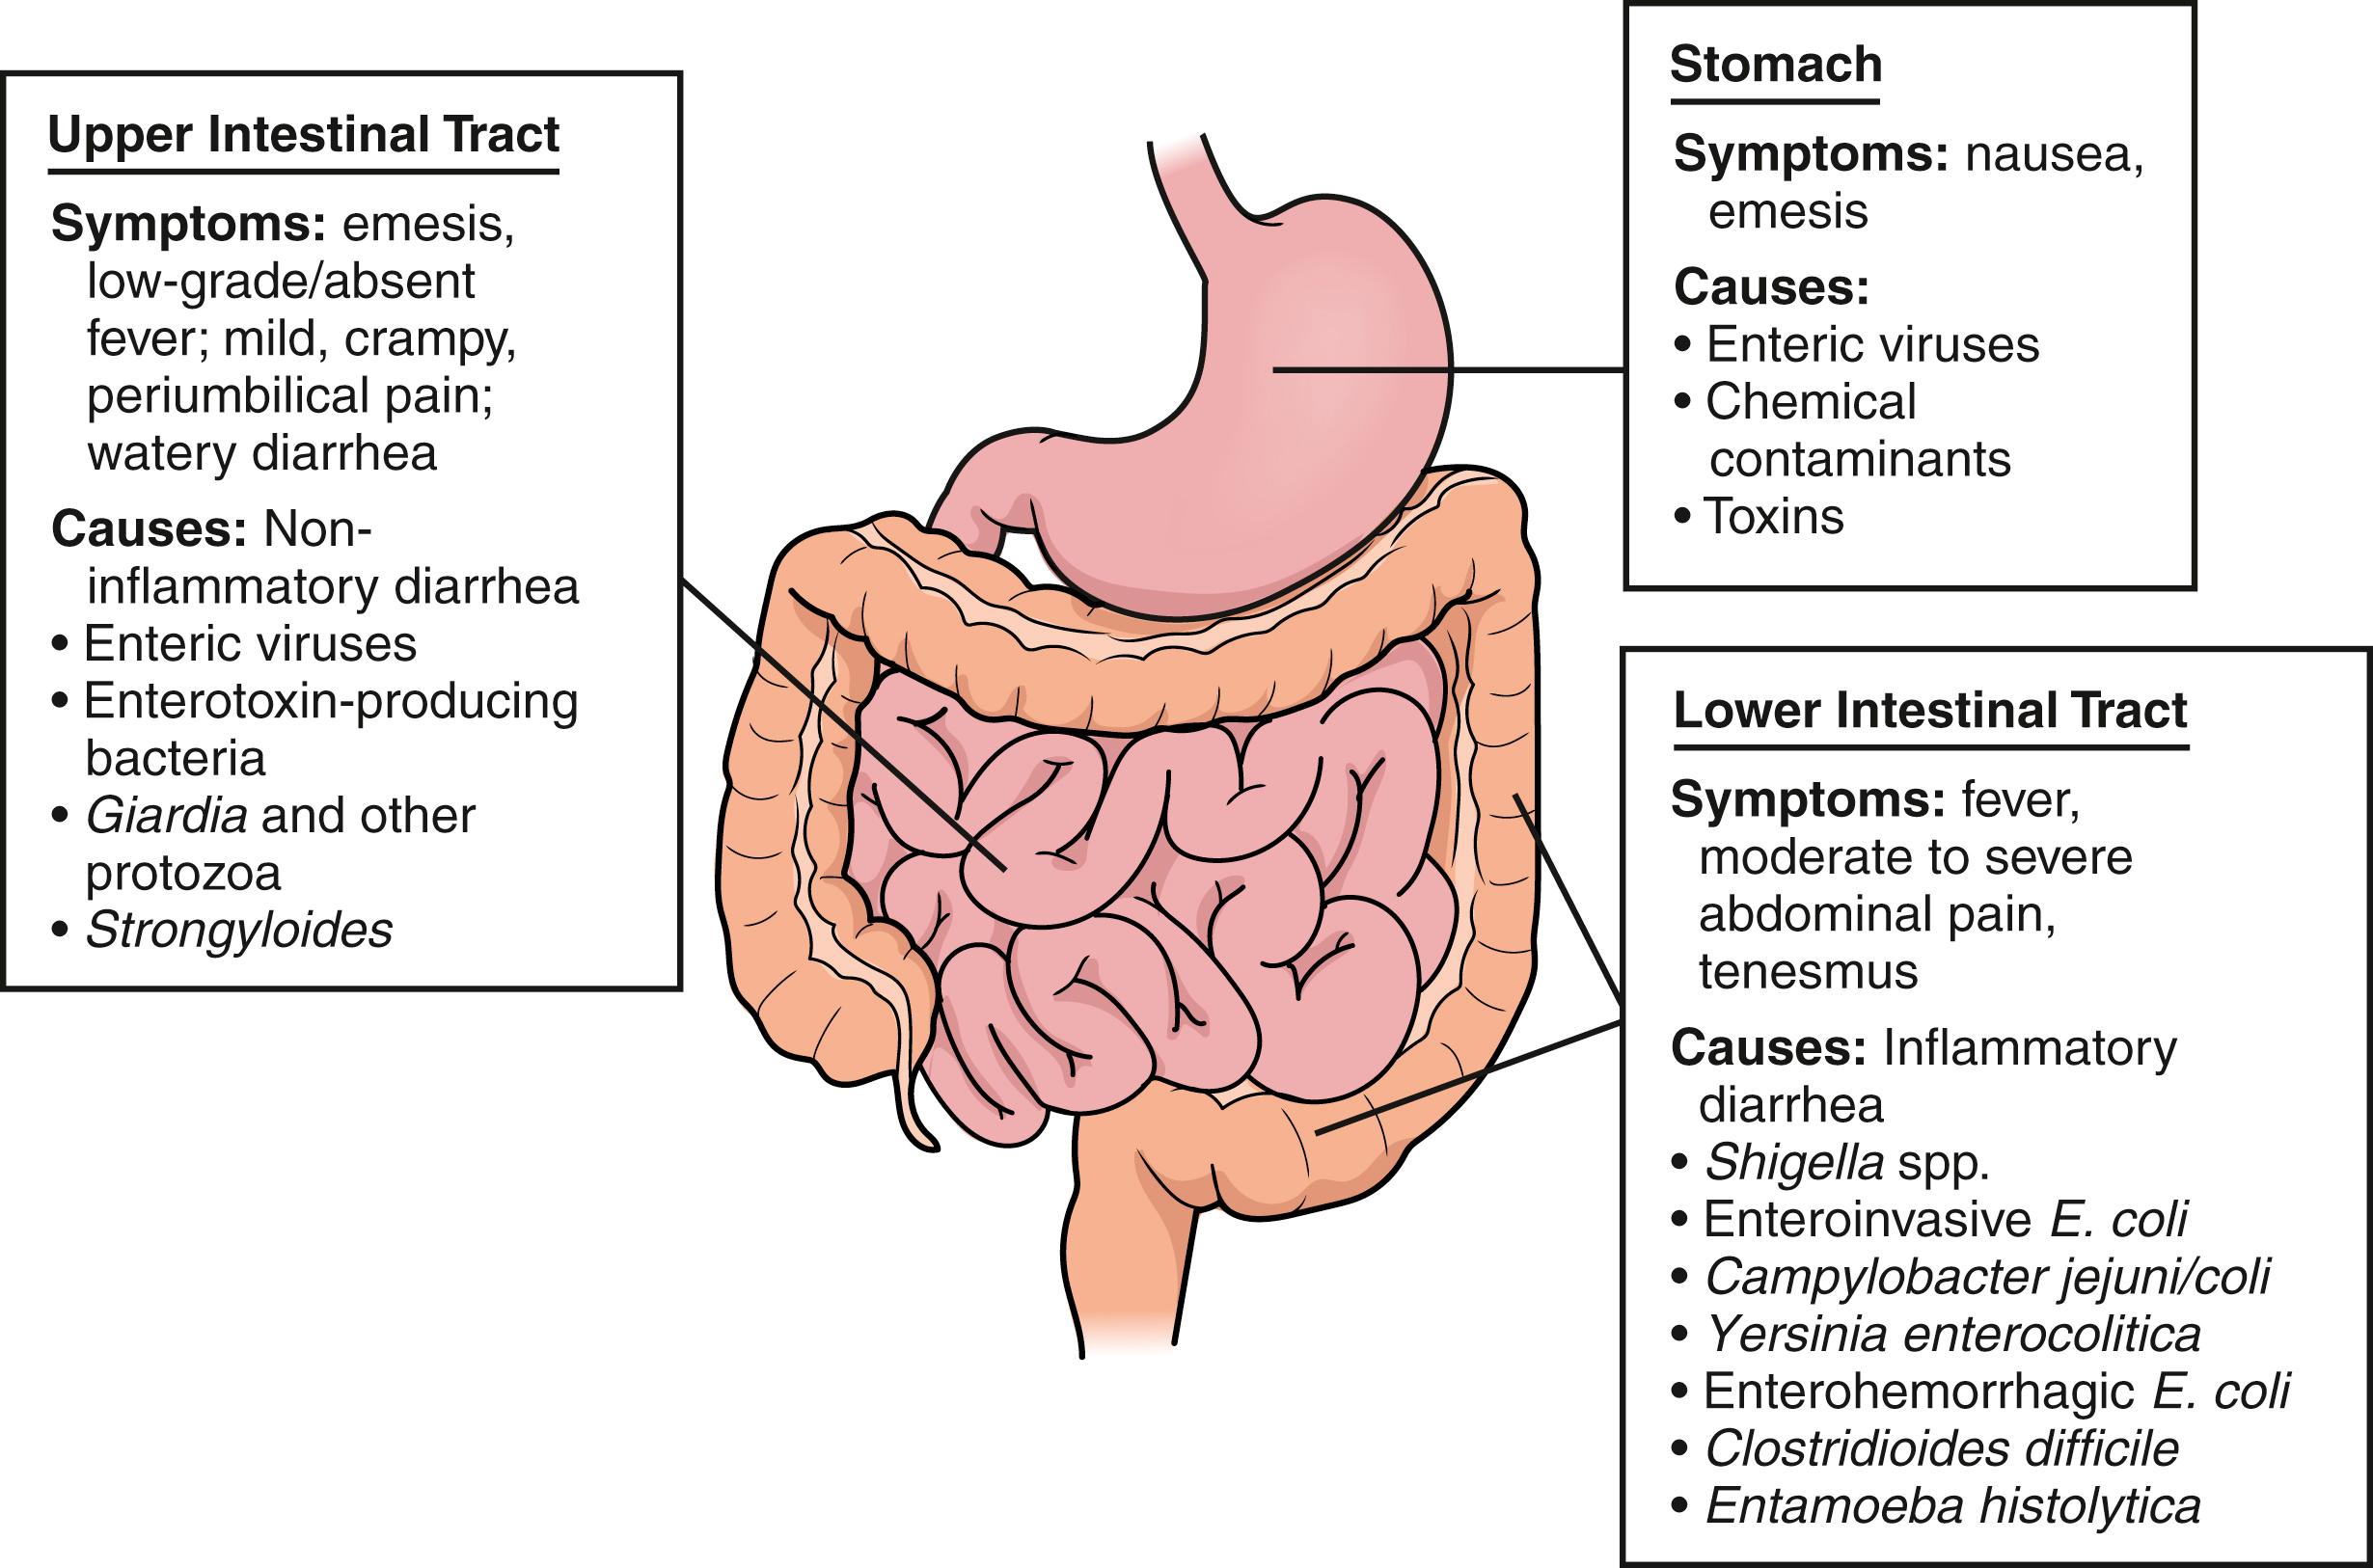 Fig. 14.1, Localizing gastrointestinal tract signs and symptoms and possible causes of illness.